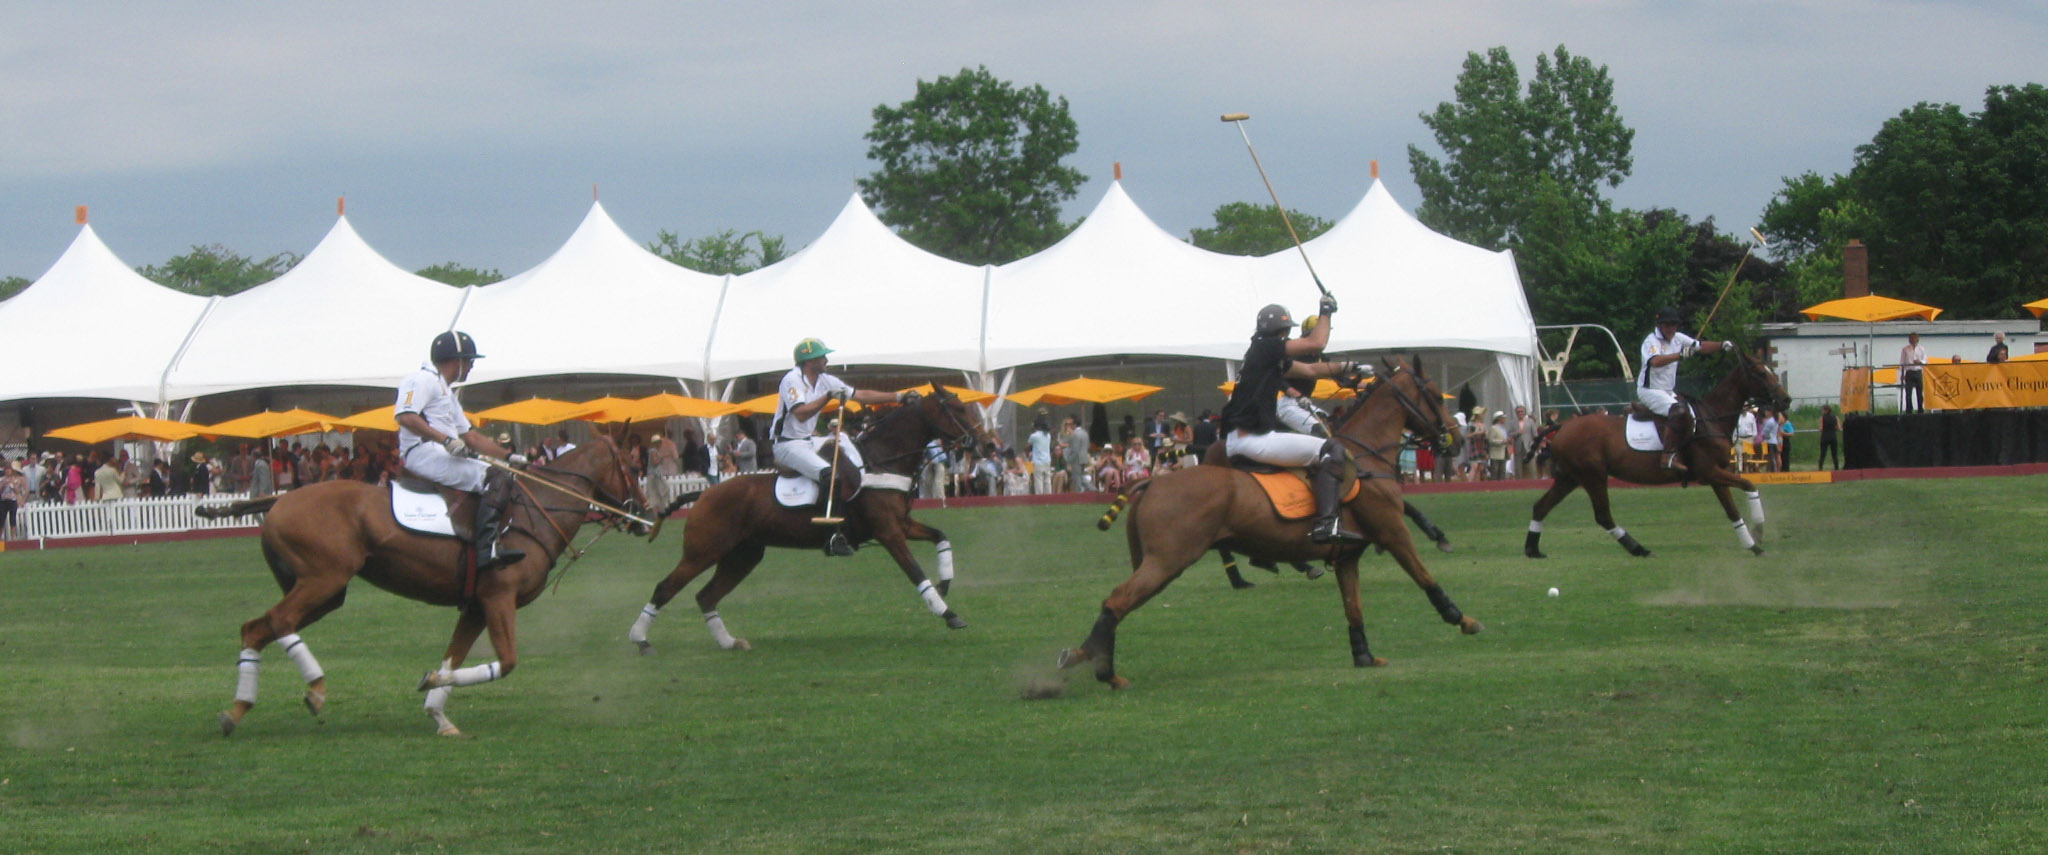 nacho02 - CELEB POLO MATCH BRINGS OUT GRACE, GLAMOUR AND BEAUTY